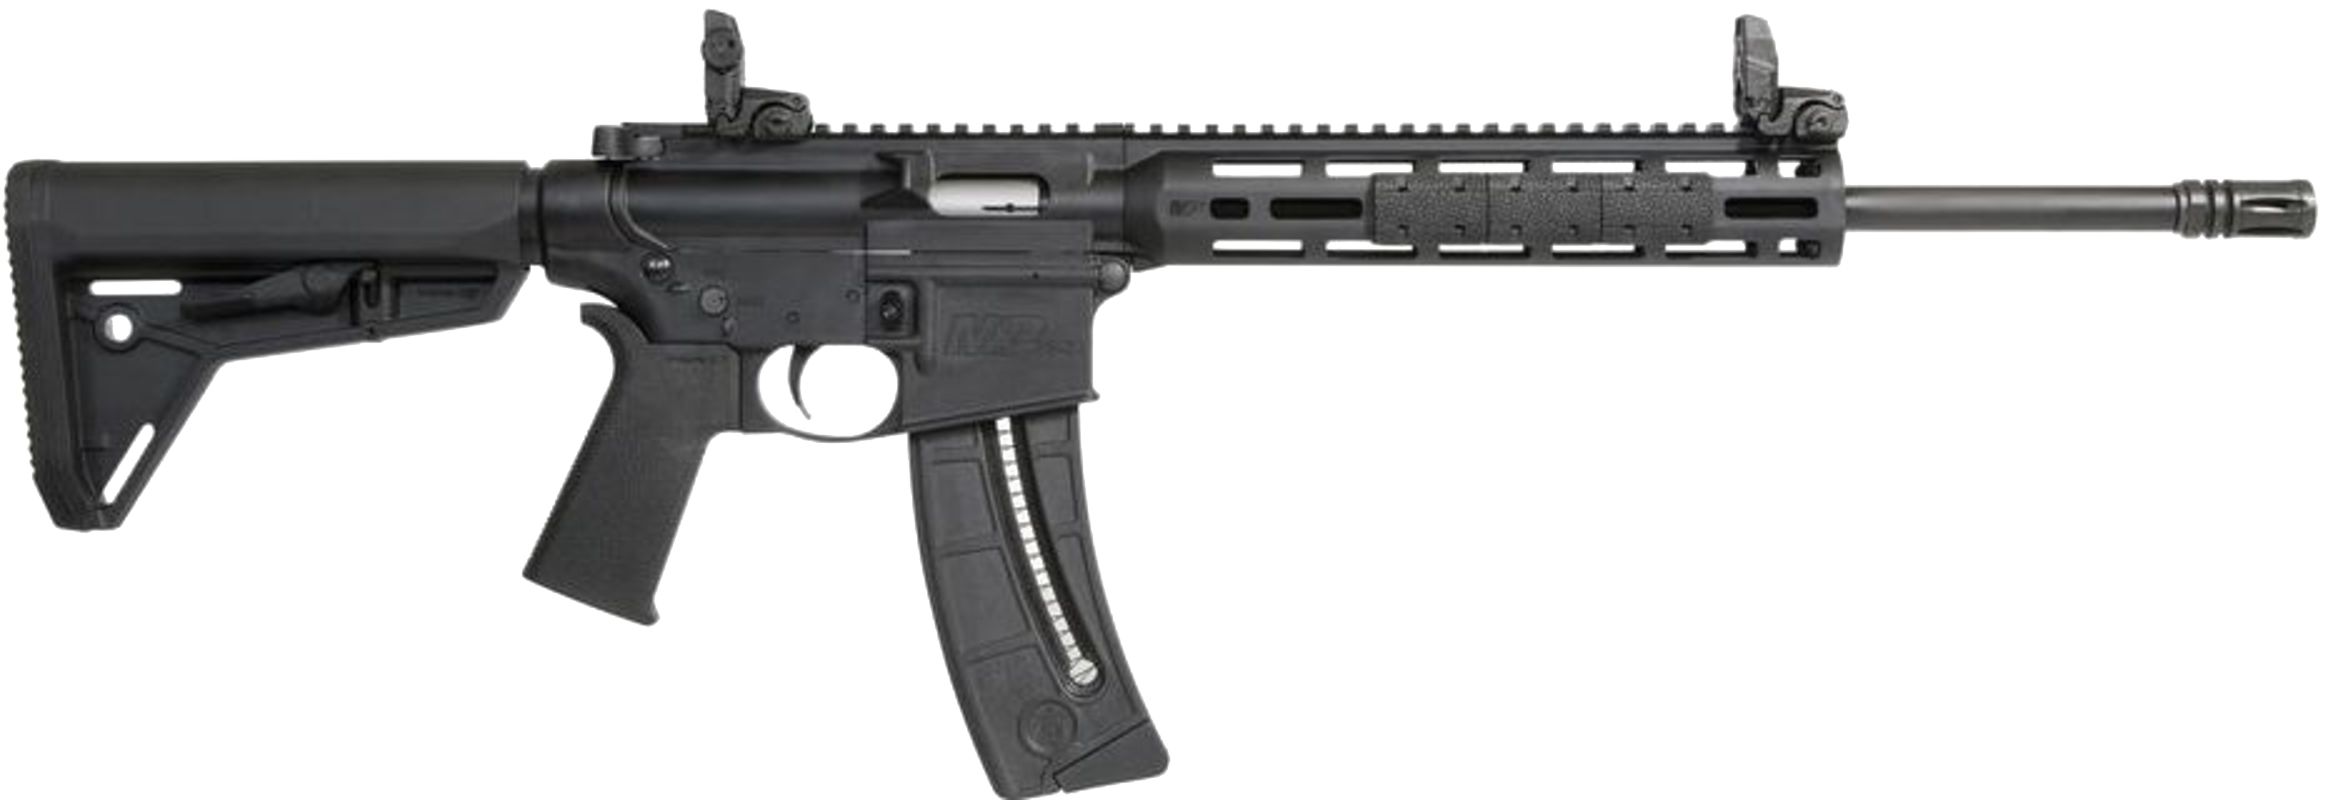 Smith & Wesson S&W M&P15-22 Sport 22 LR Caliber with 25+1 Capacity 10213-img-1